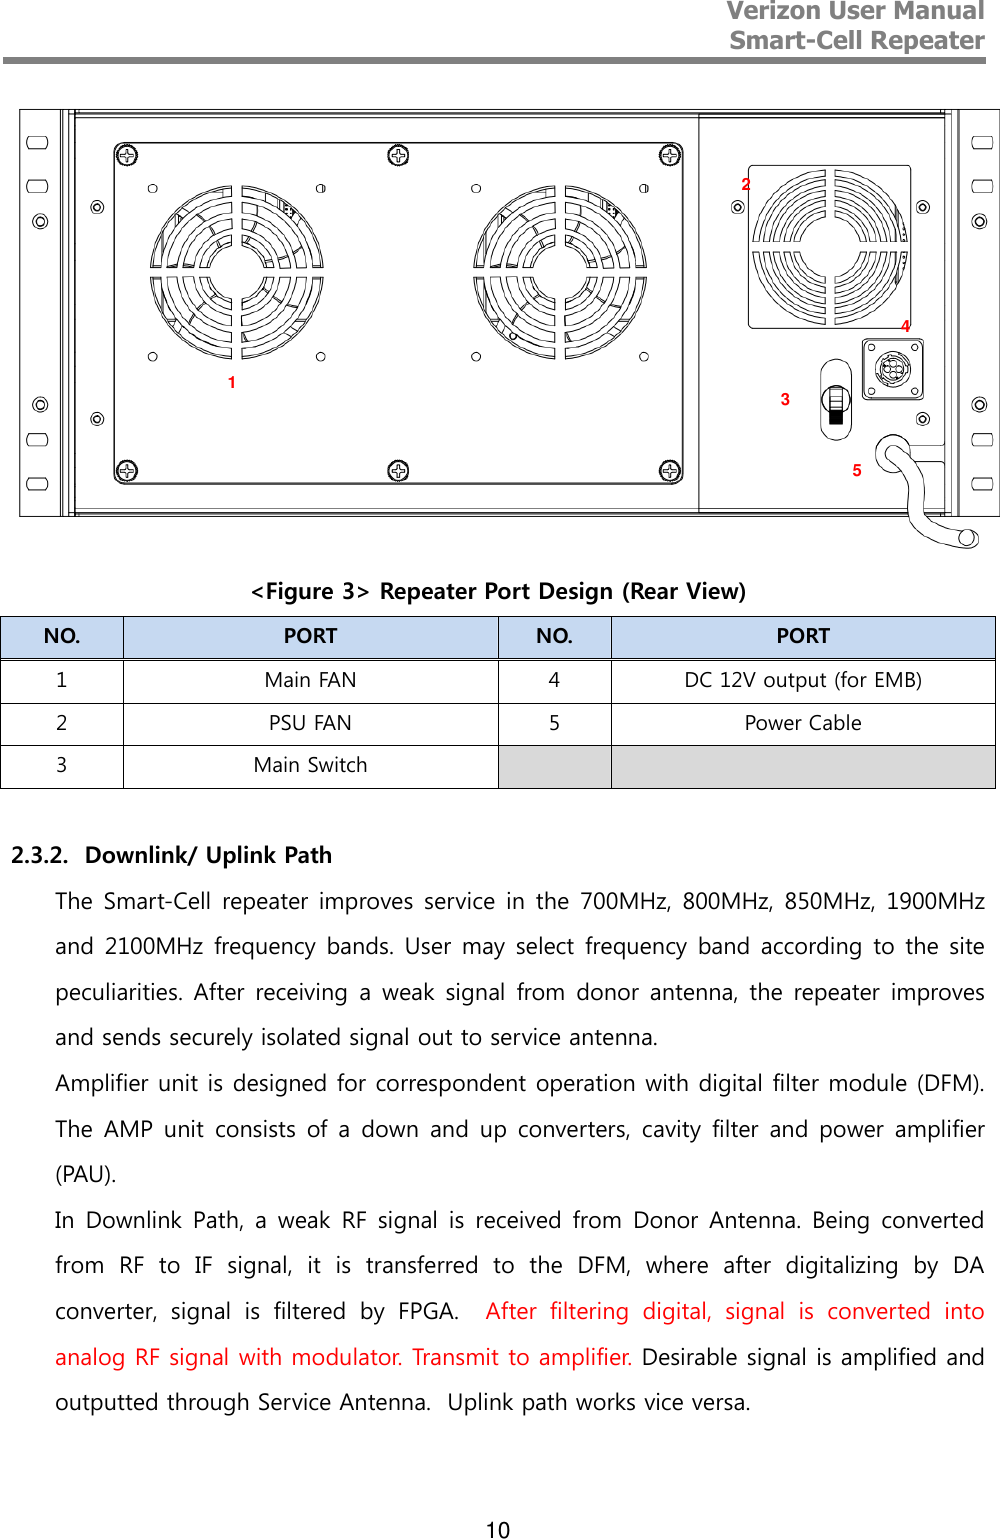 Verizon User Manual  Smart-Cell Repeater   10  &lt;Figure 3&gt; Repeater Port Design (Rear View) NO. PORT NO. PORT 1 Main FAN 4 DC 12V output (for EMB) 2 PSU FAN 5 Power Cable 3 Main Switch    2.3.2. Downlink/ Uplink Path The Smart-Cell repeater improves service in the  700MHz, 800MHz, 850MHz, 1900MHz and 2100MHz  frequency bands. User may select frequency band according to the site peculiarities. After receiving  a weak signal  from donor antenna, the repeater improves and sends securely isolated signal out to service antenna. Amplifier unit is designed for correspondent operation with digital filter module (DFM). The AMP unit consists of  a  down  and up converters, cavity  filter  and power  amplifier (PAU). In Downlink Path, a weak  RF signal is received  from  Donor Antenna. Being converted from  RF  to  IF  signal,  it  is  transferred  to  the  DFM,  where  after  digitalizing  by  DA converter,  signal  is  filtered  by  FPGA.    After  filtering  digital,  signal  is  converted  into analog RF signal with modulator. Transmit to amplifier. Desirable signal is amplified and outputted through Service Antenna.  Uplink path works vice versa.  1 2 3 5 4 